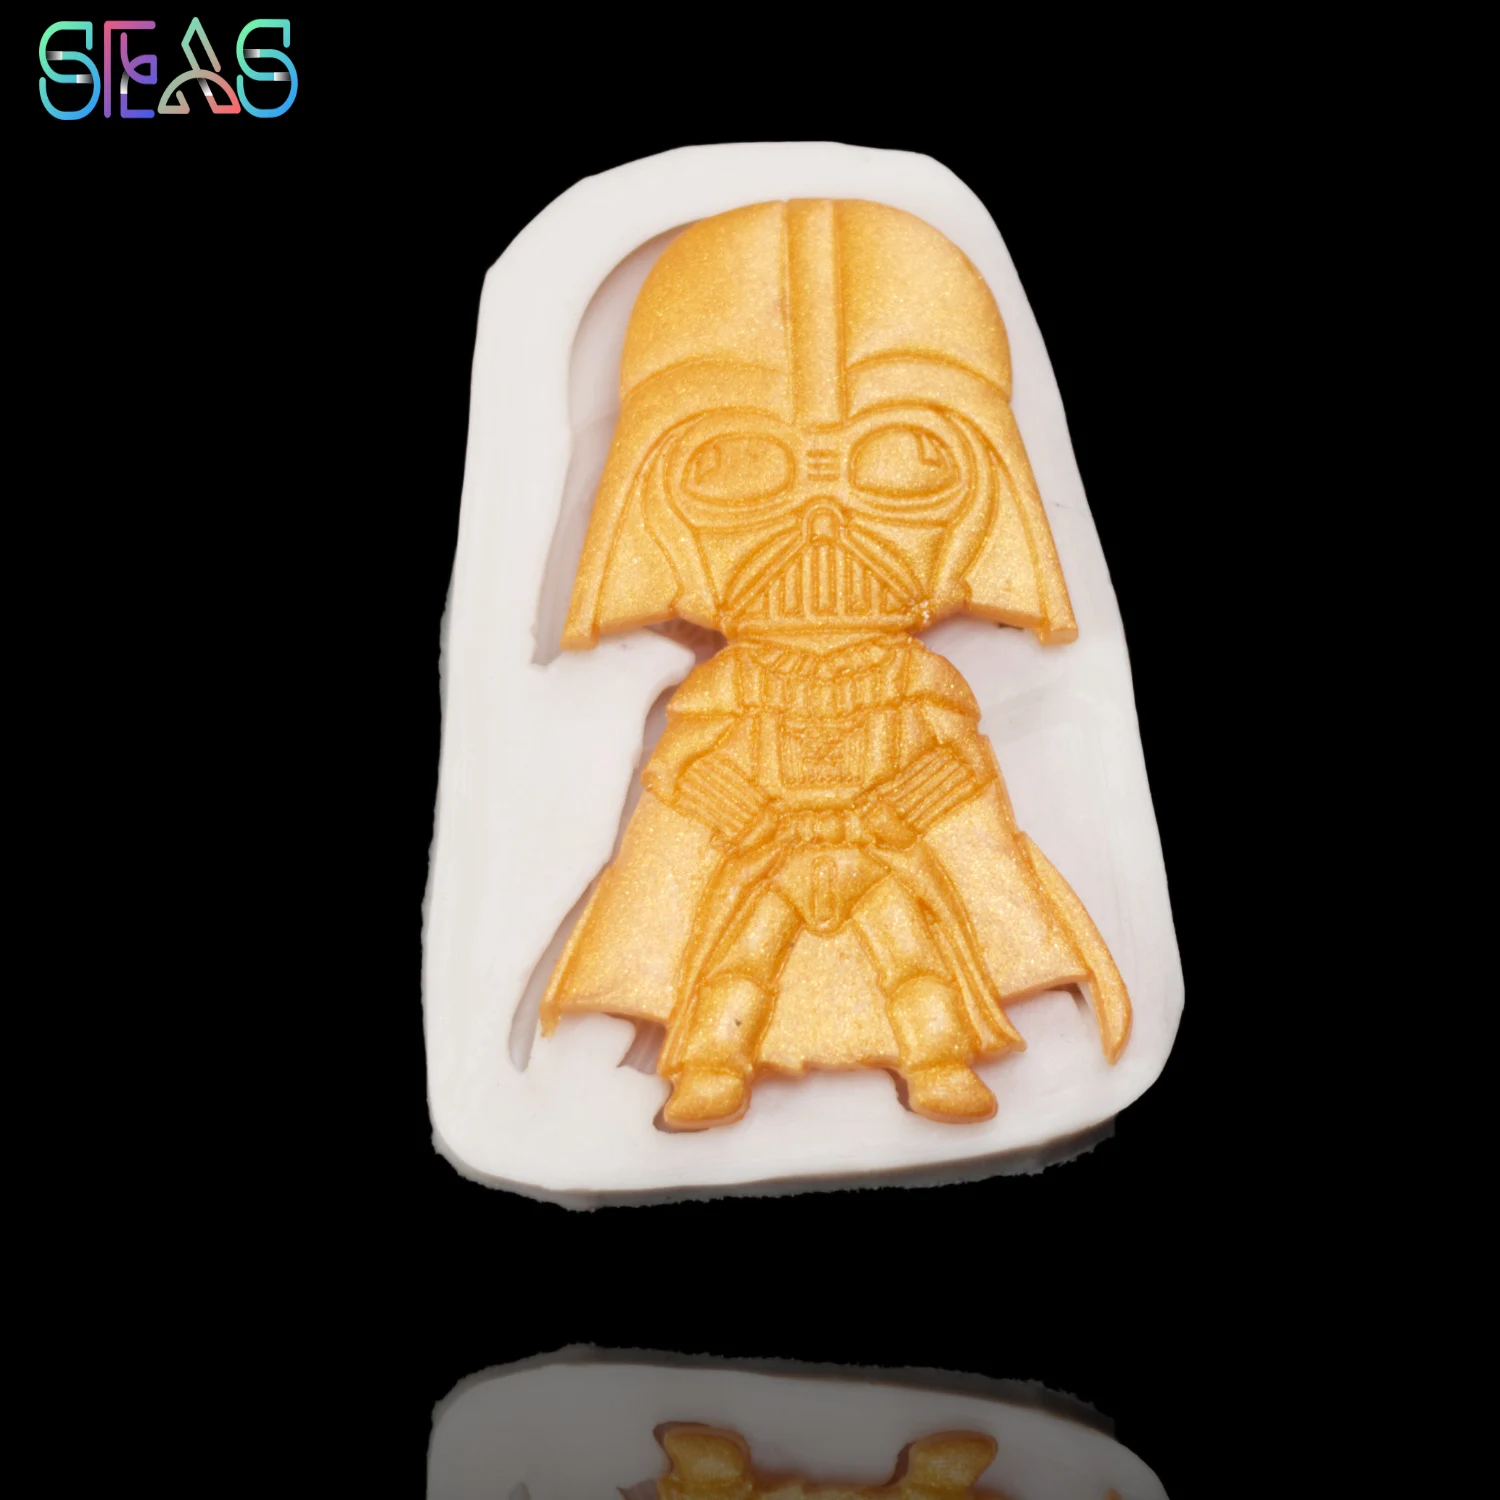 3D Silicone Mold Darth Vader Star Wars Ice Mold Candy Chocolate